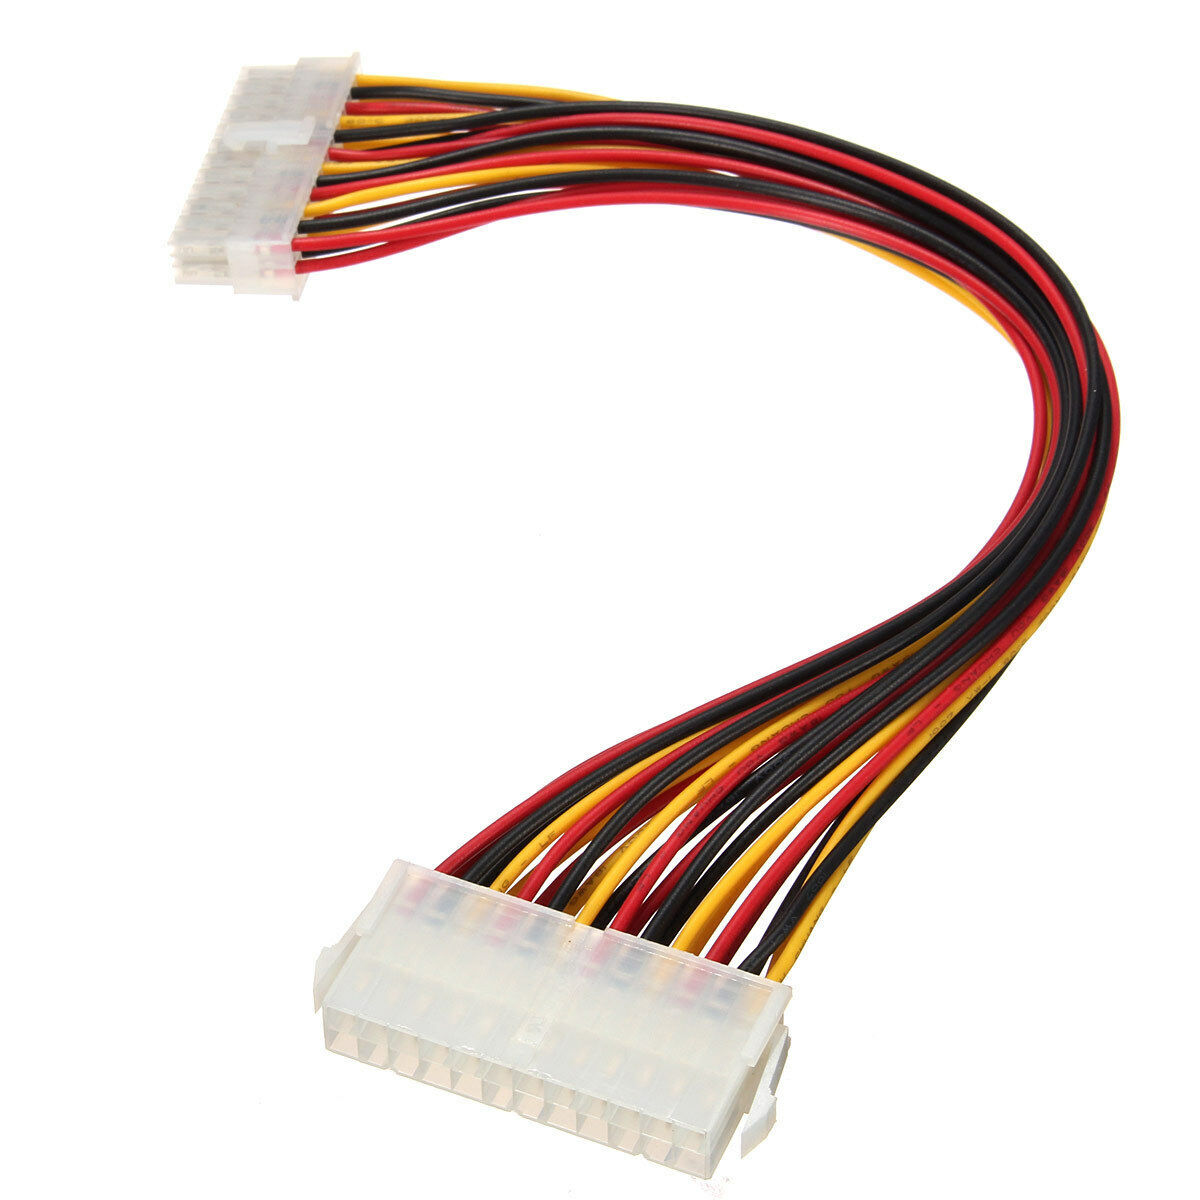 ATX 24 PIN MALE TO FEMALE PSU POWER CABLE EXTENSION